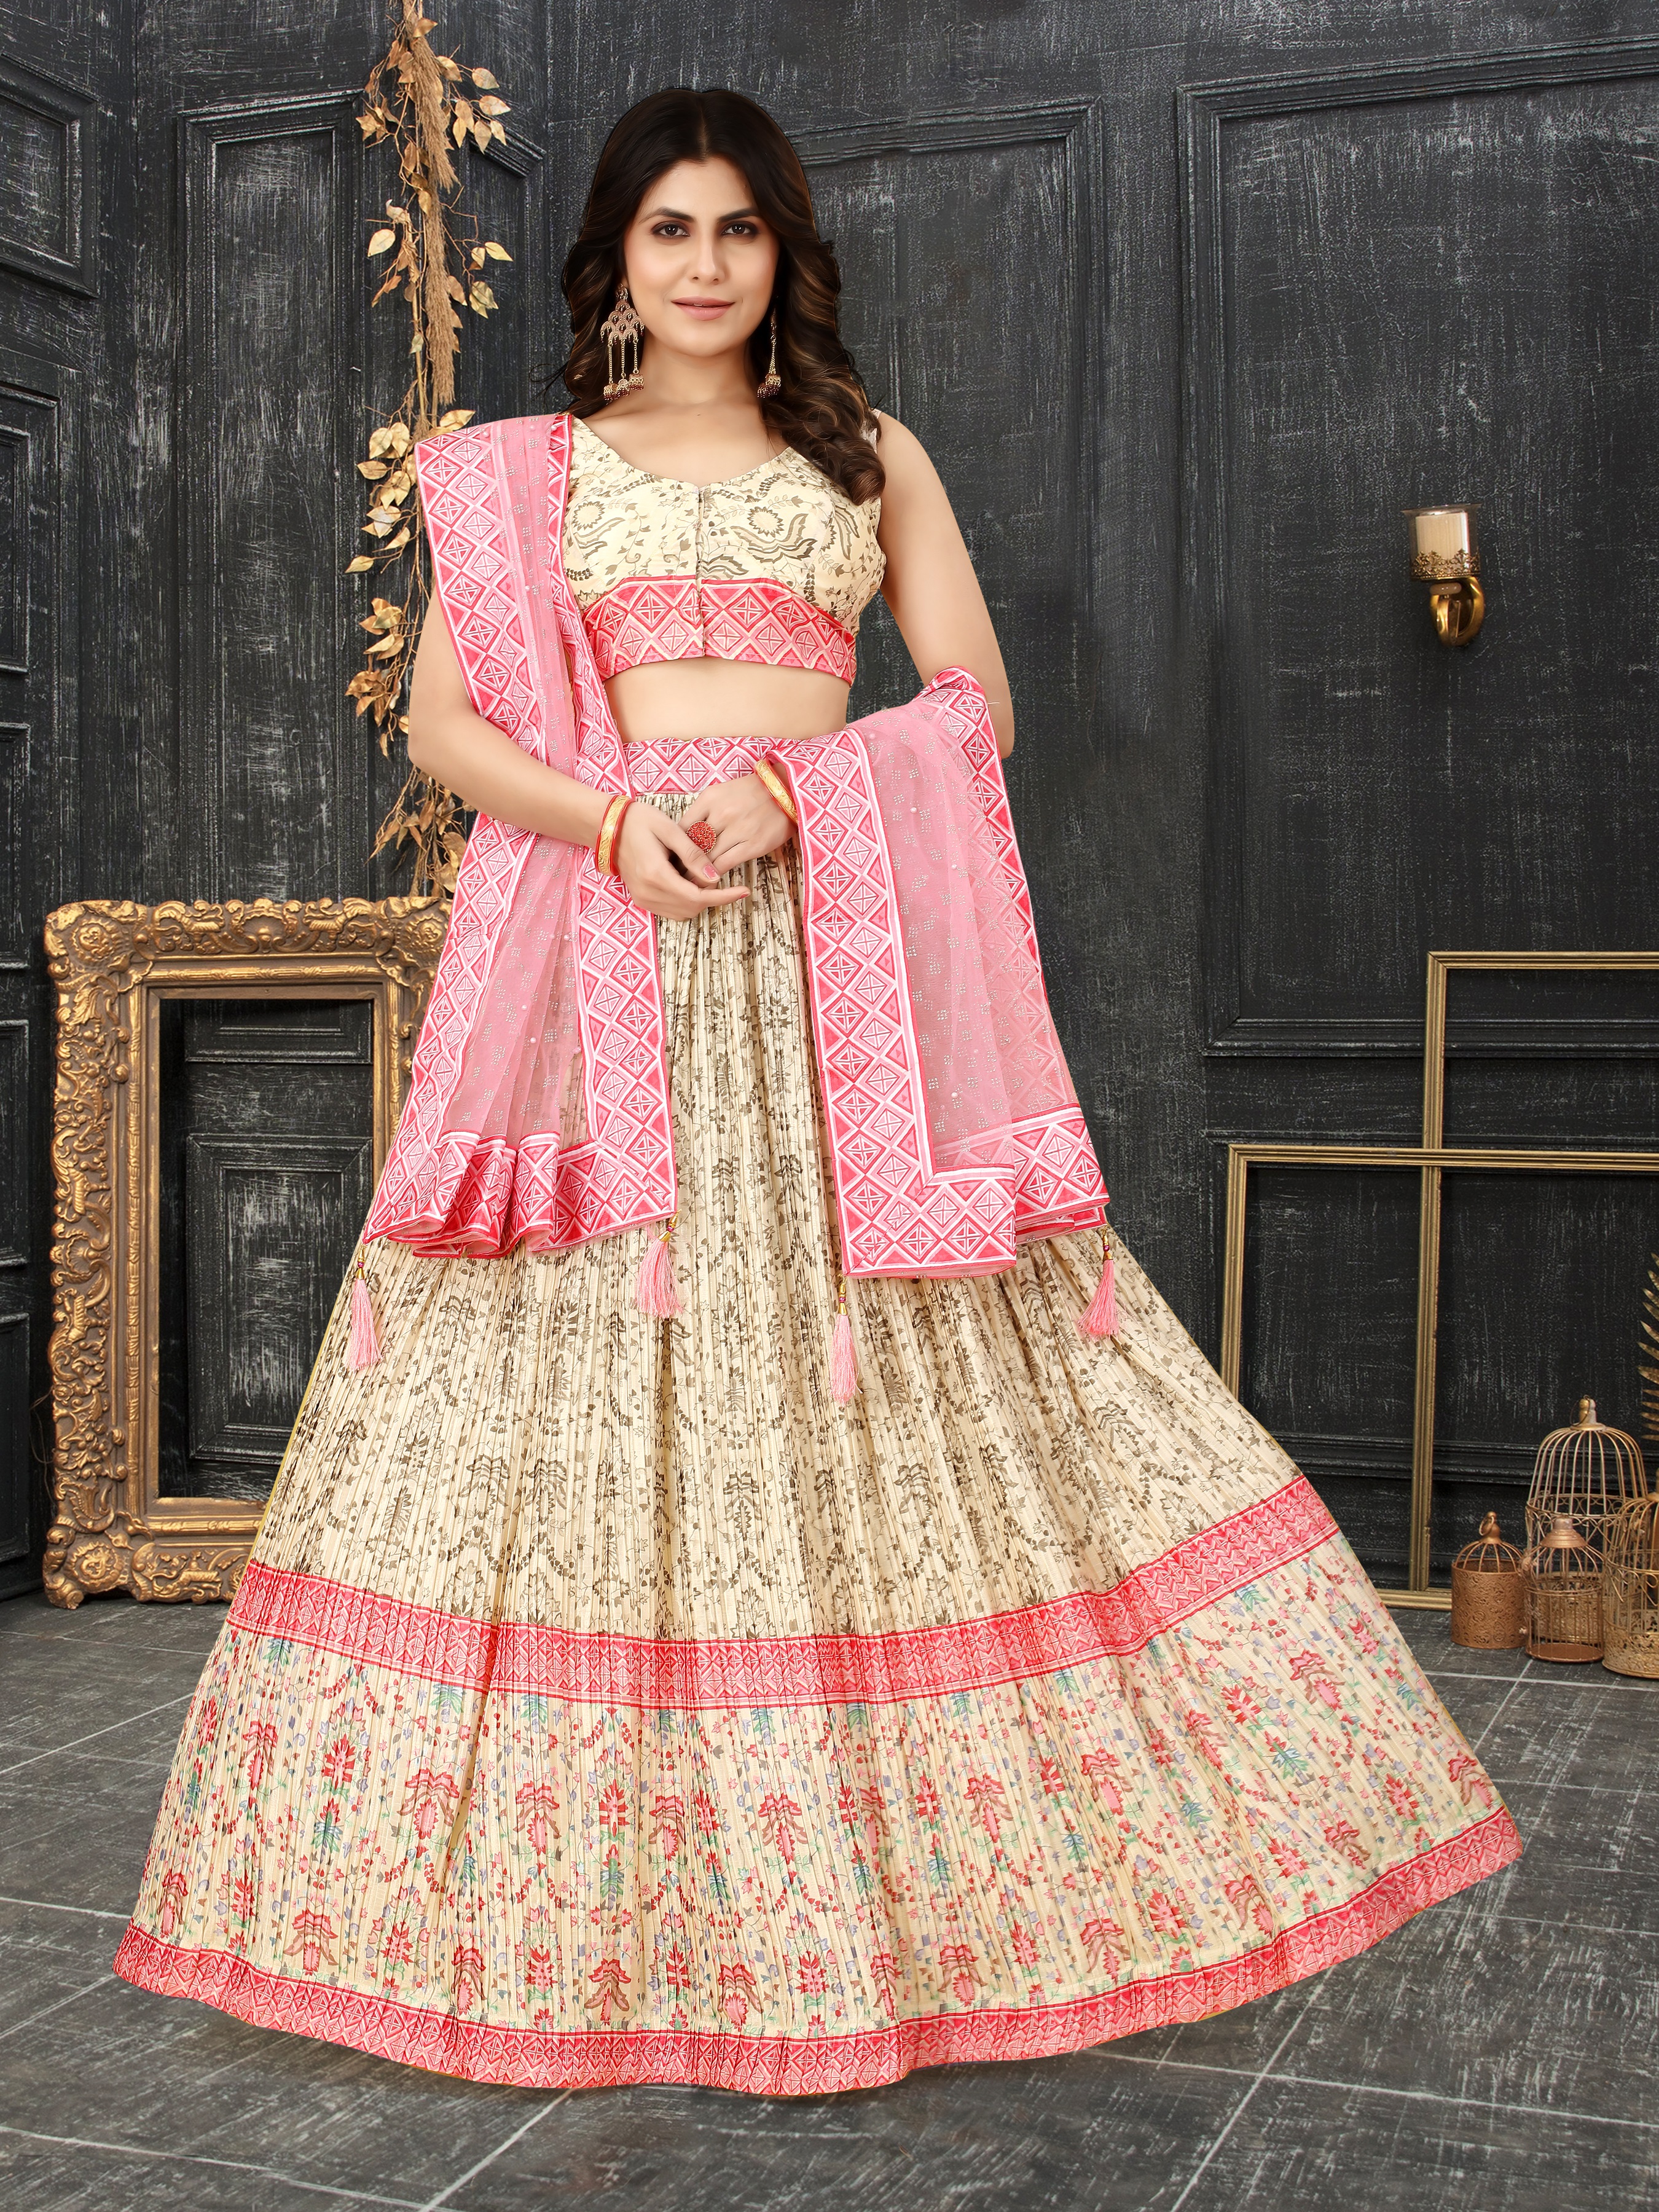 Women Georgette Lehenga And Sequence Work Lehenga Choli... Manufacturer,  Women Georgette Lehenga And Sequence Work Lehenga Choli... Supplier,  Exporter